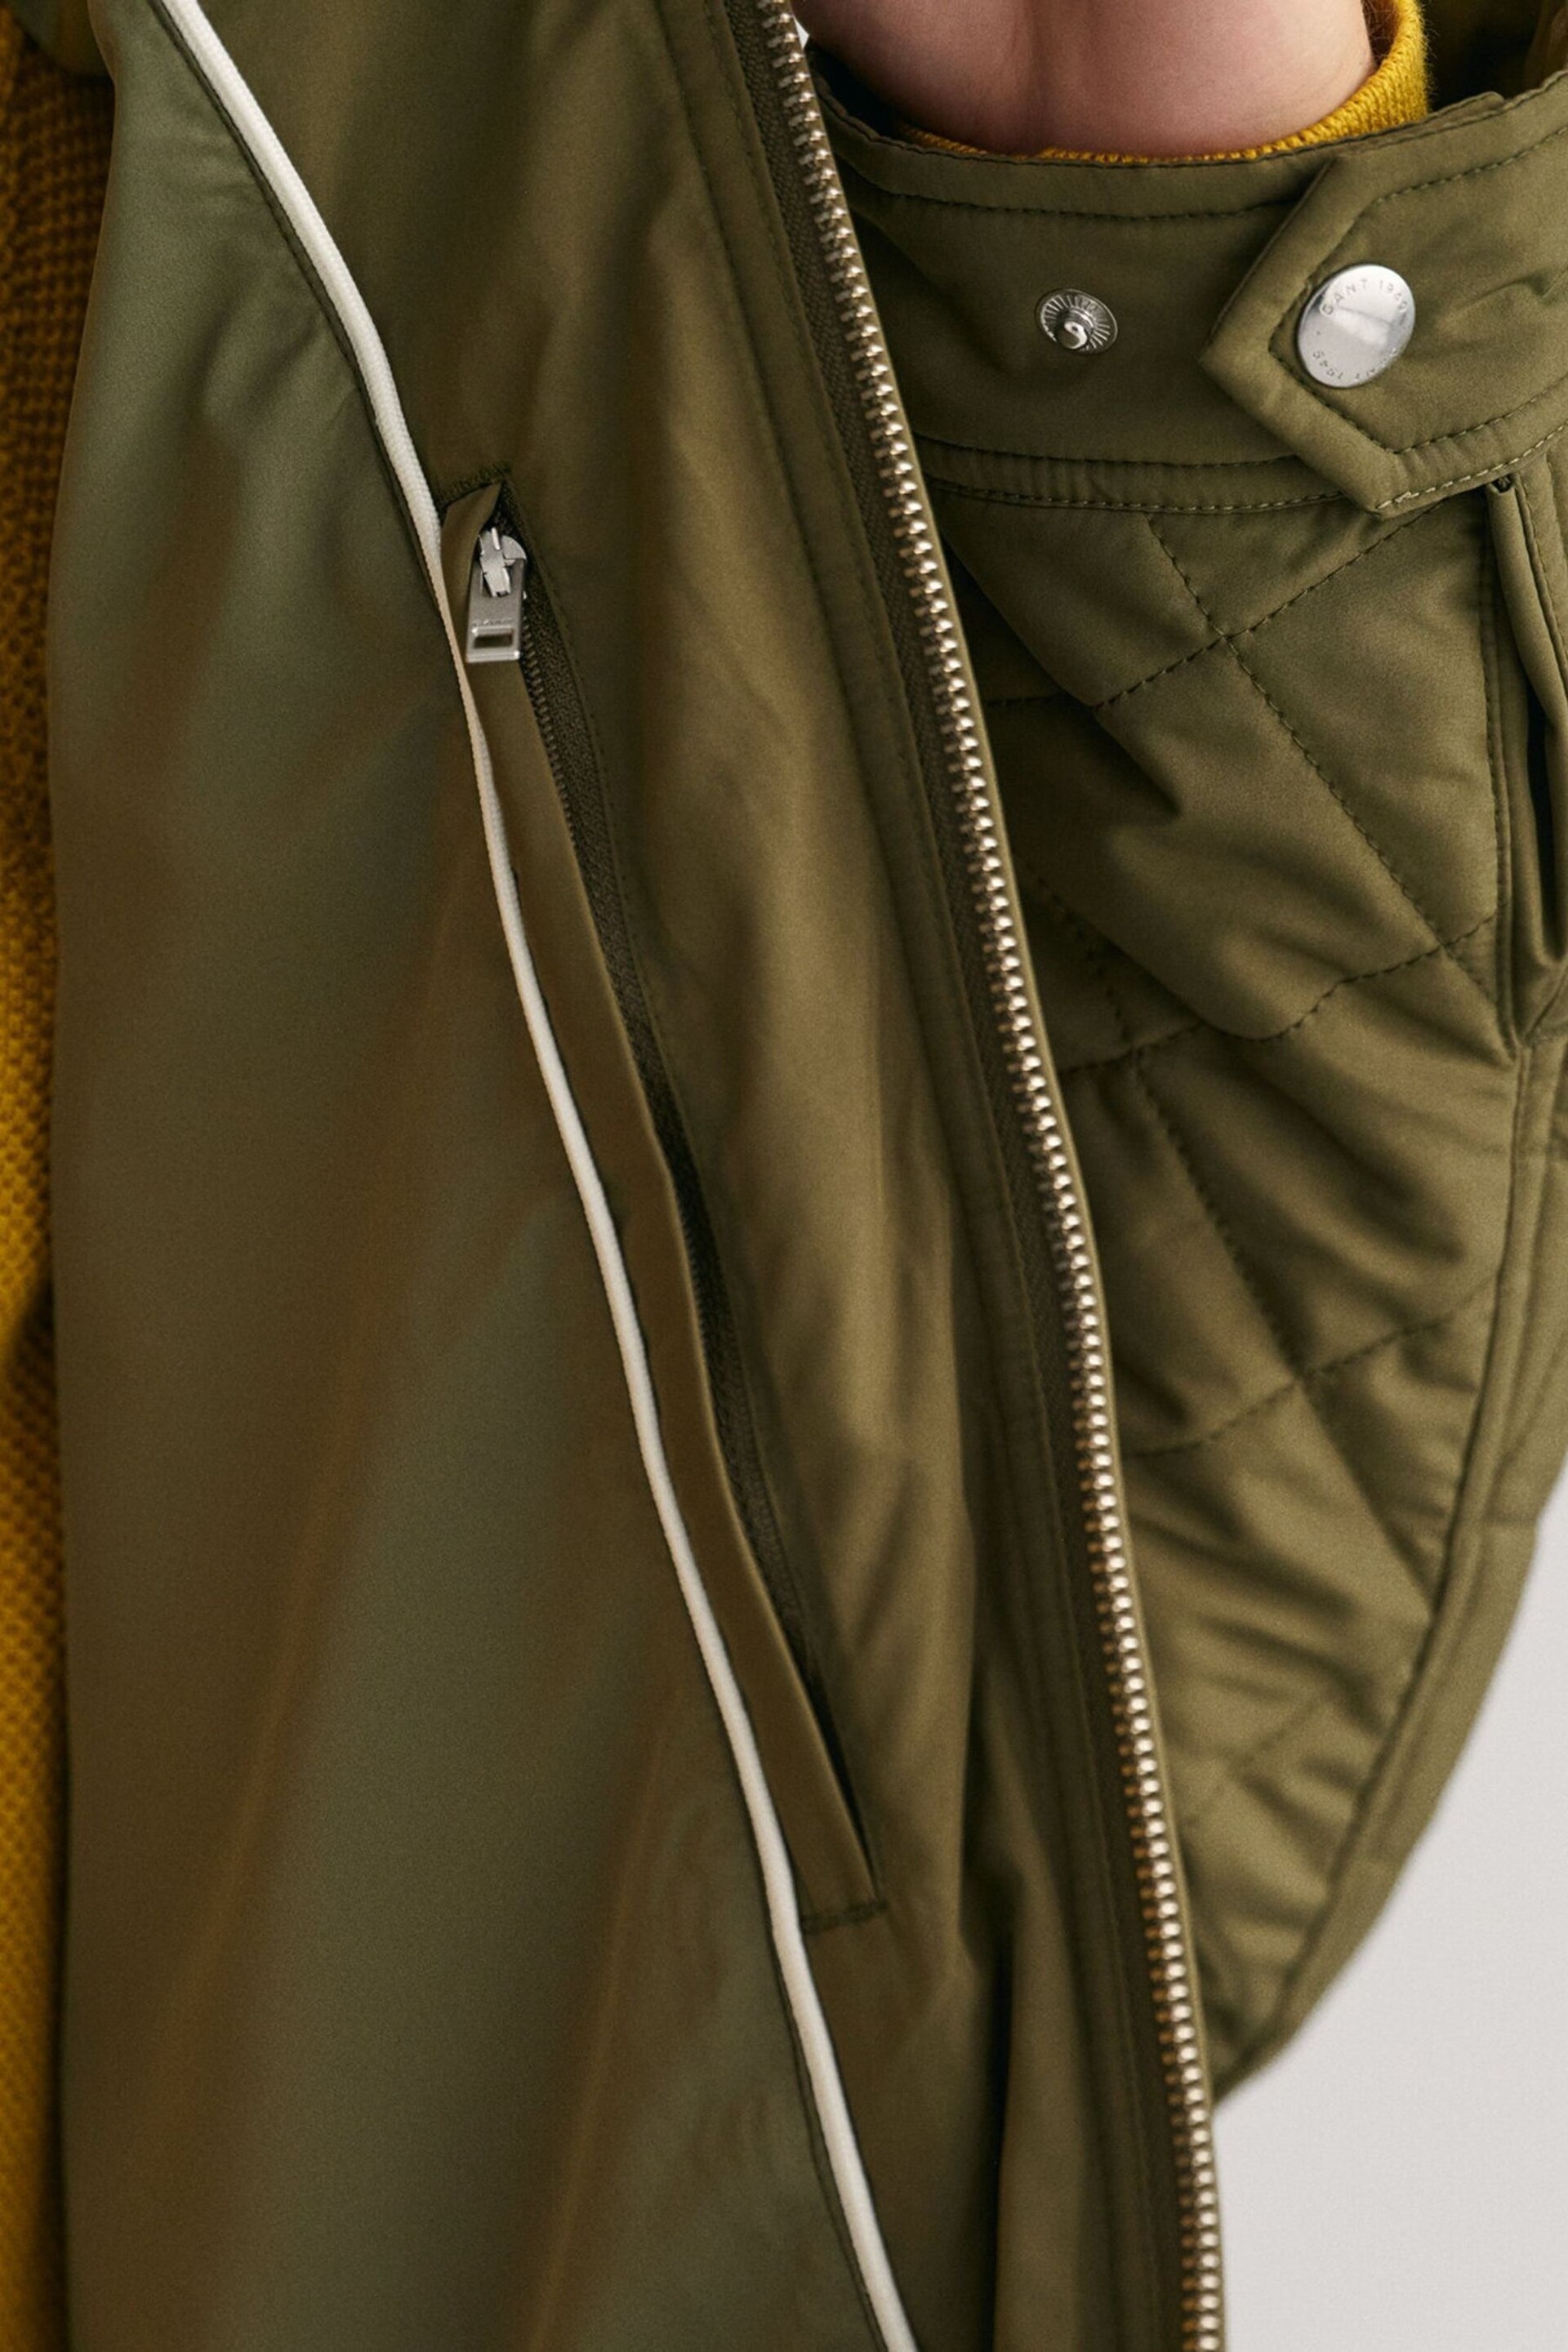 GANT Green Quilted Windcheater Jacket - Image 6 of 6